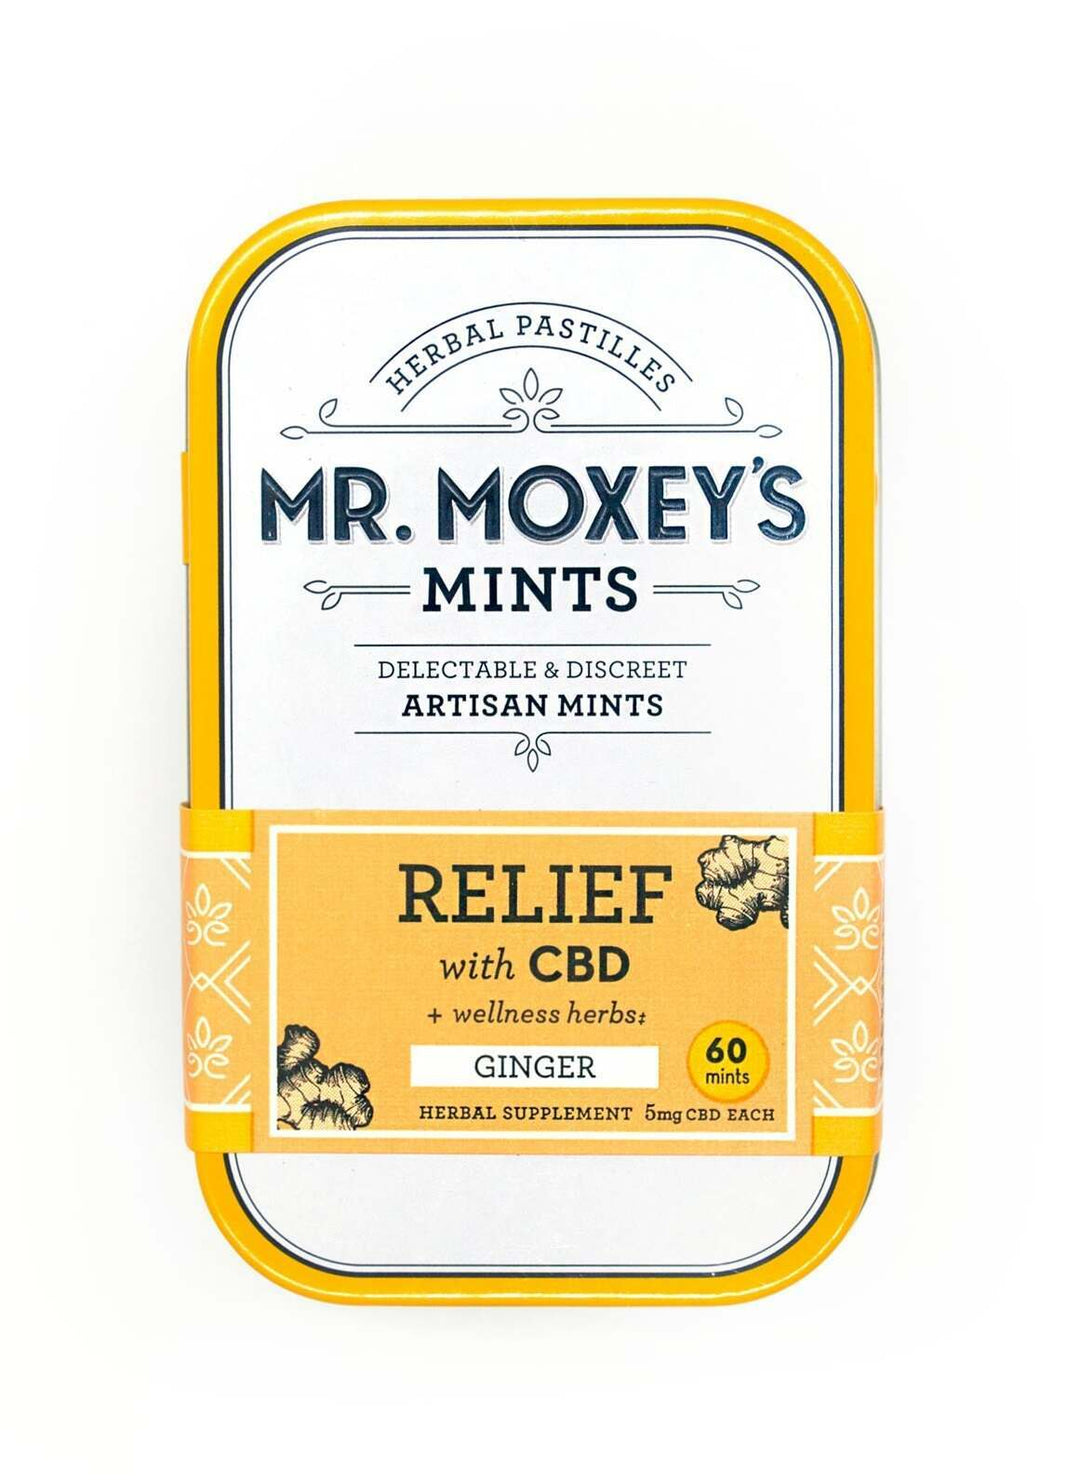 Mr Moxey's Relief CBD 300mg Ginger Mints - 60 Mints